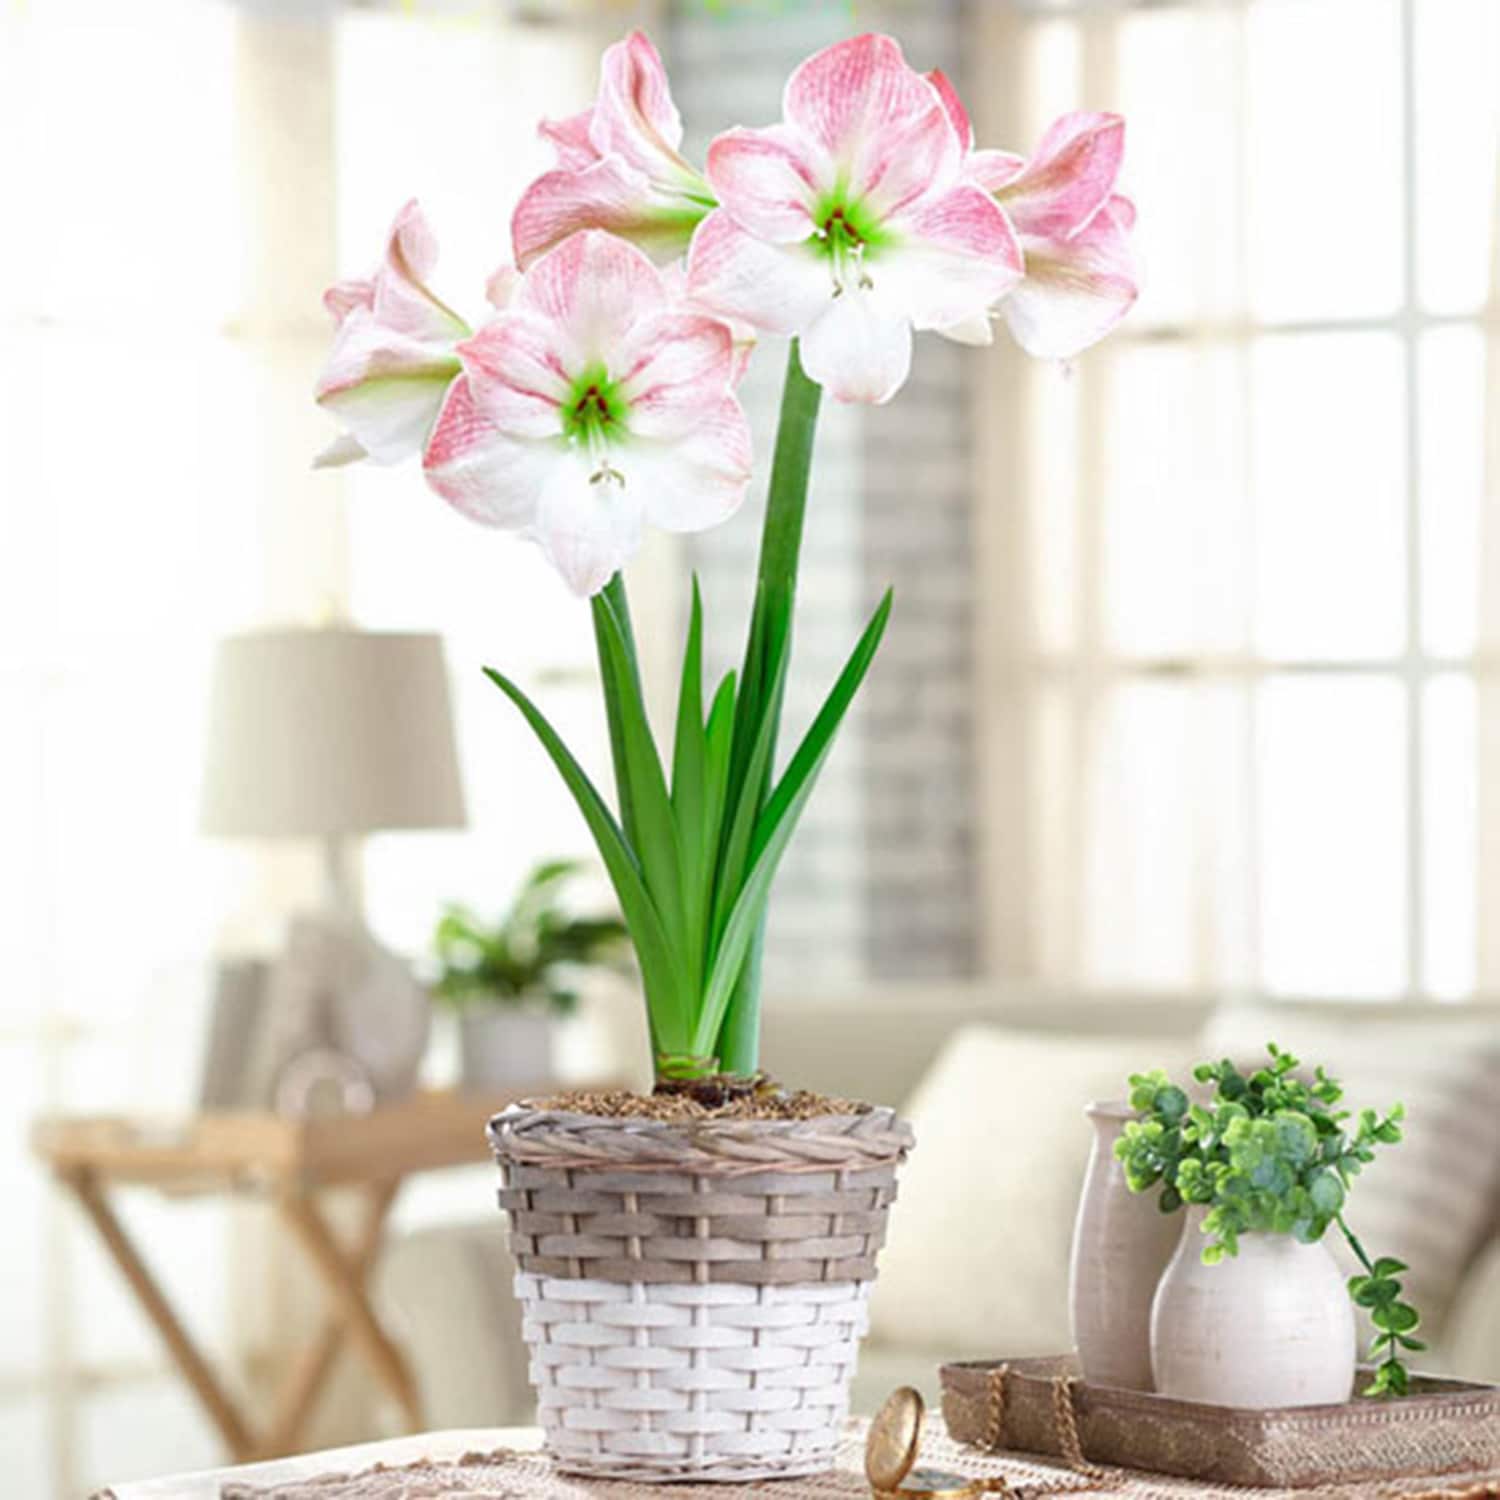 Breck's Mixed Amaryllis House Plant in 1-Pack Pot at Lowes.com